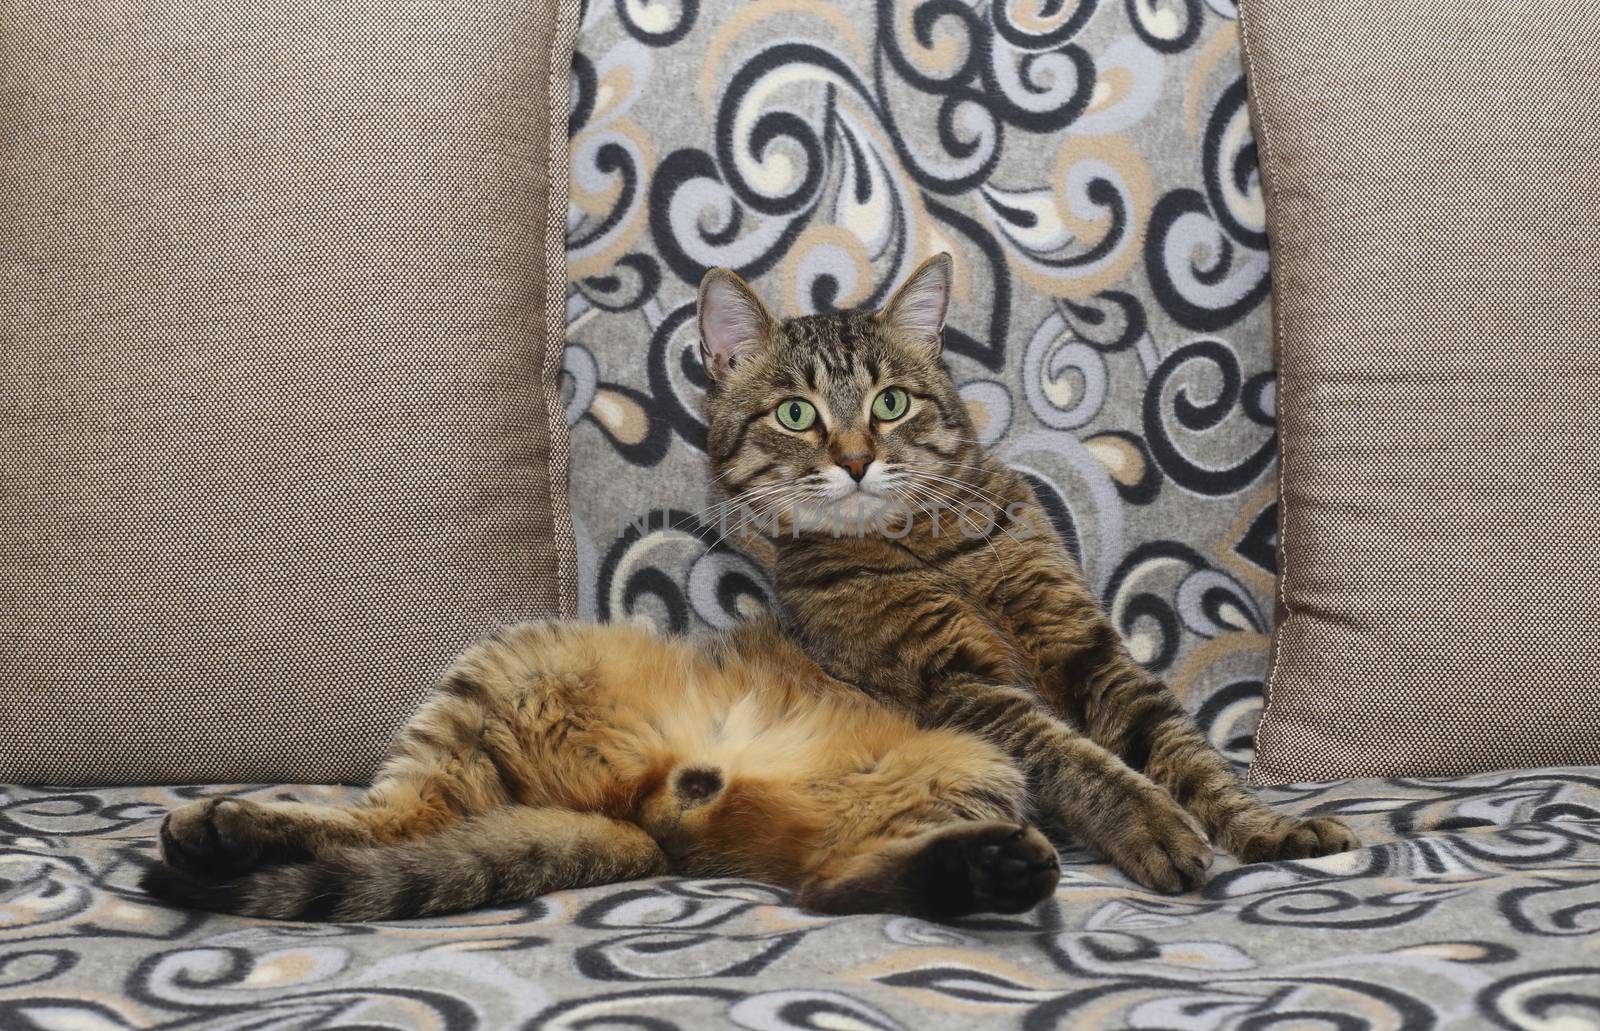 Handsome cat. Fluffy and striped is on the couch in a relaxed pose.